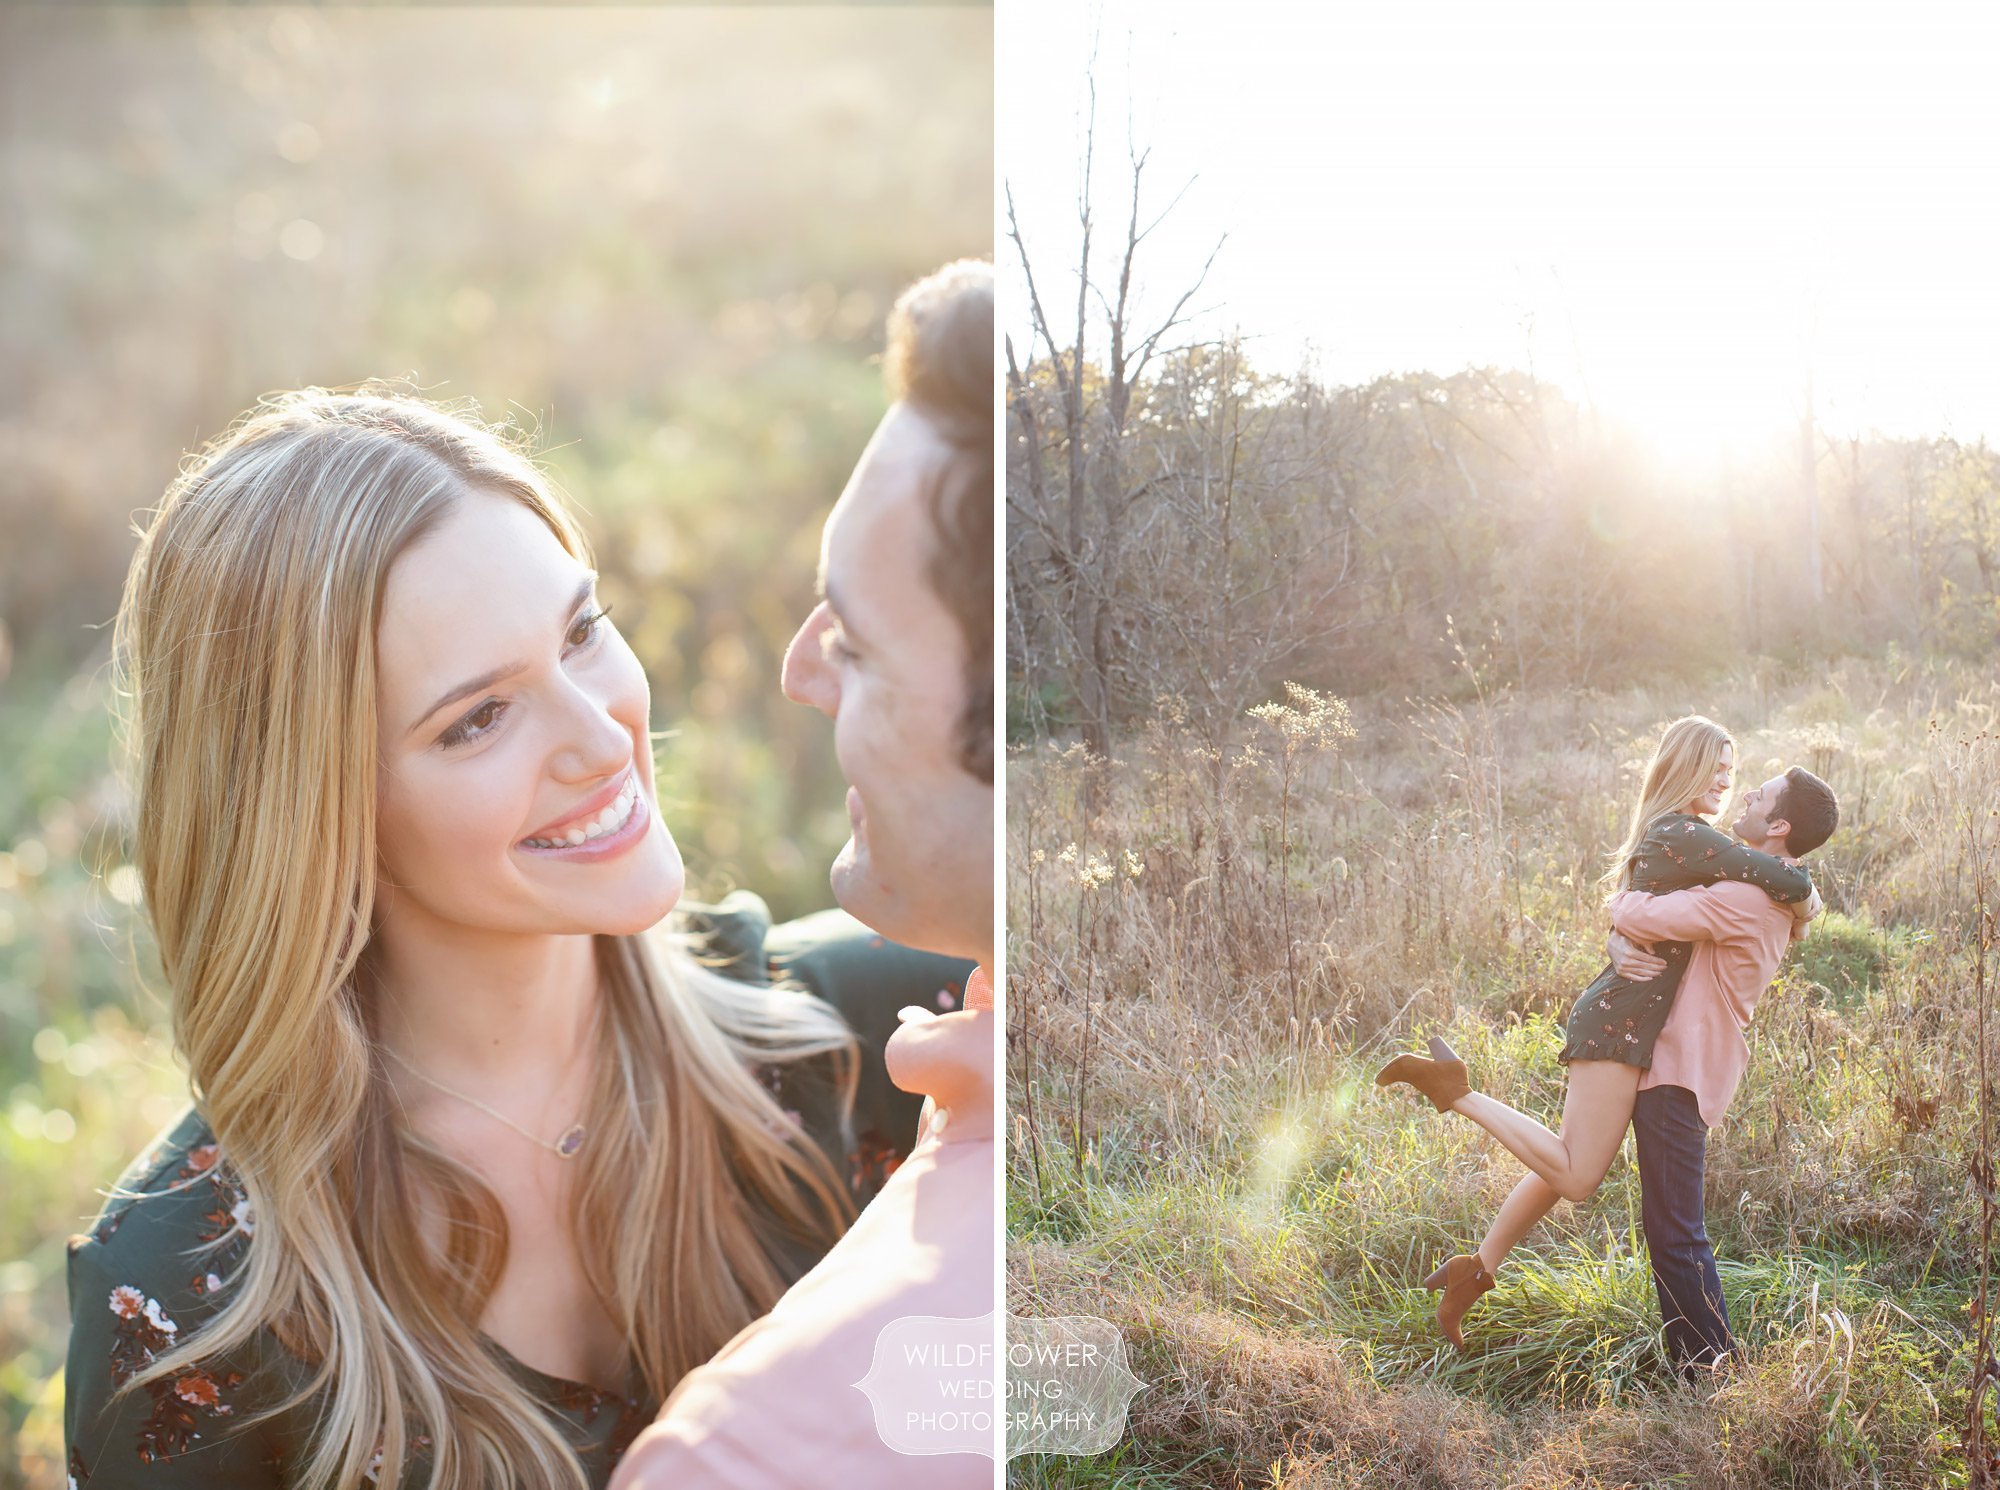 Romantic engagement photography pose ideas at sunset during this outdoor session at Grindstone Capen Park.